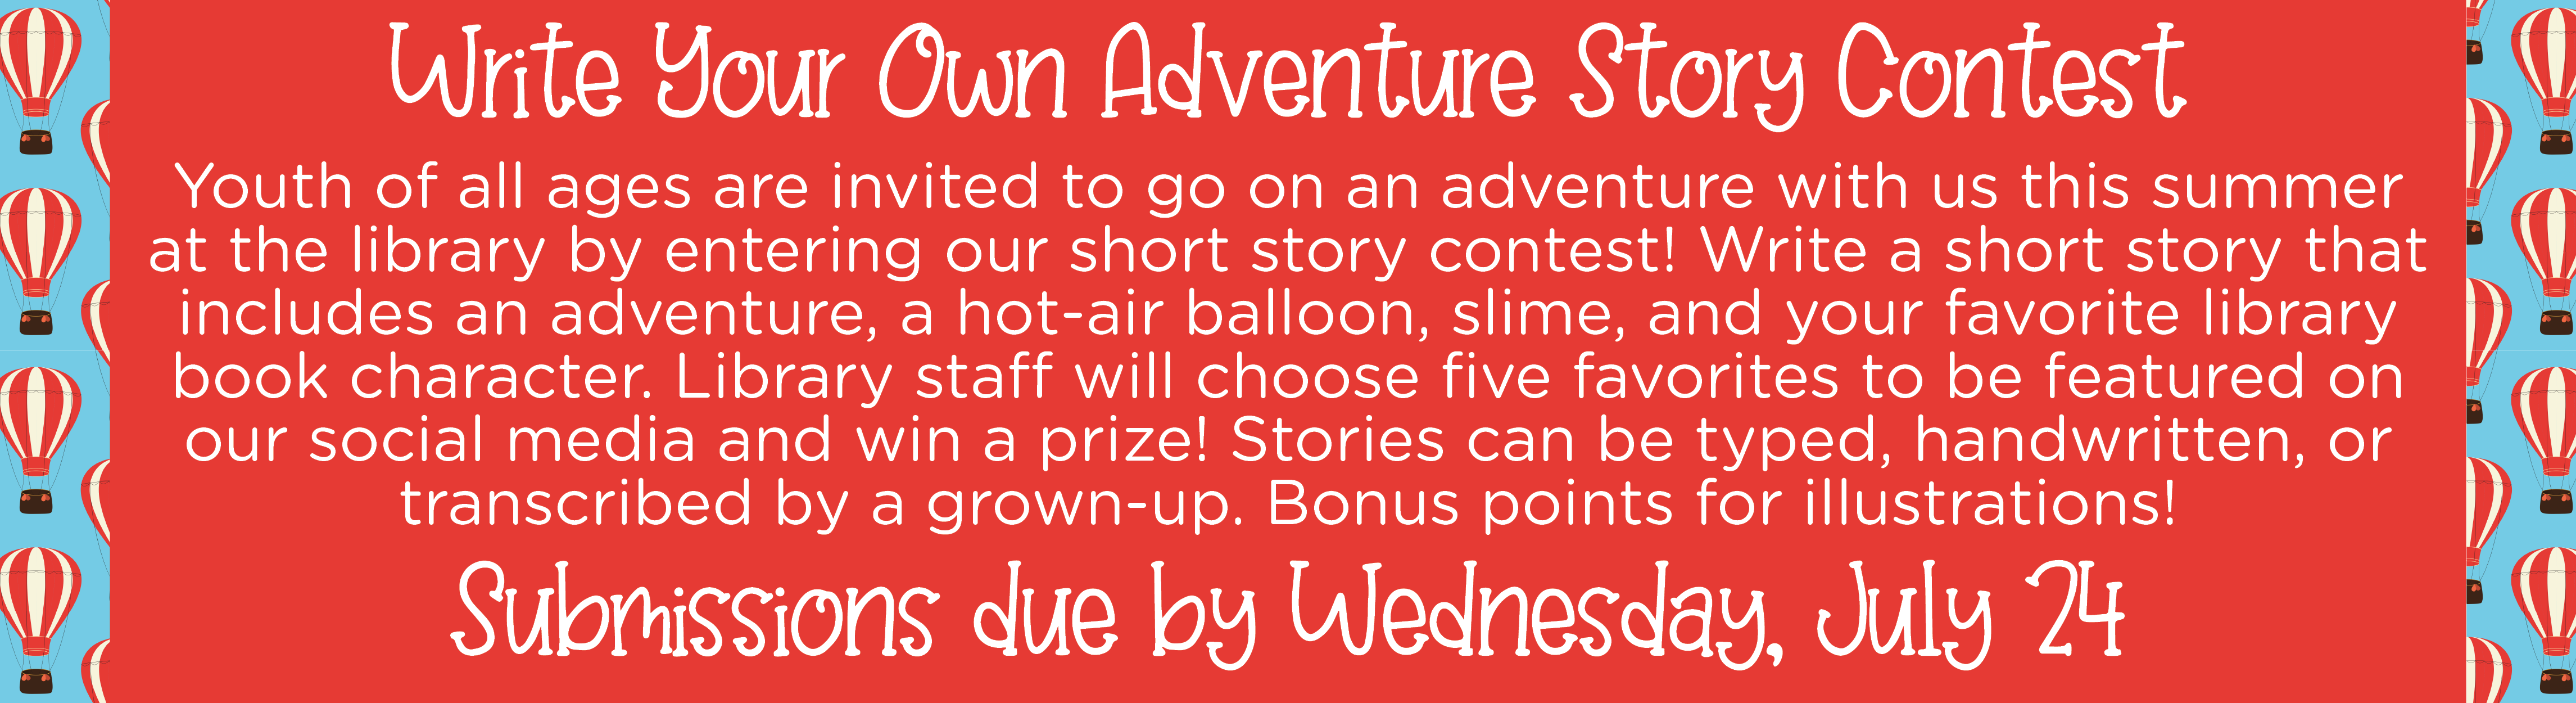 Write Your Own Adventure Story Contest